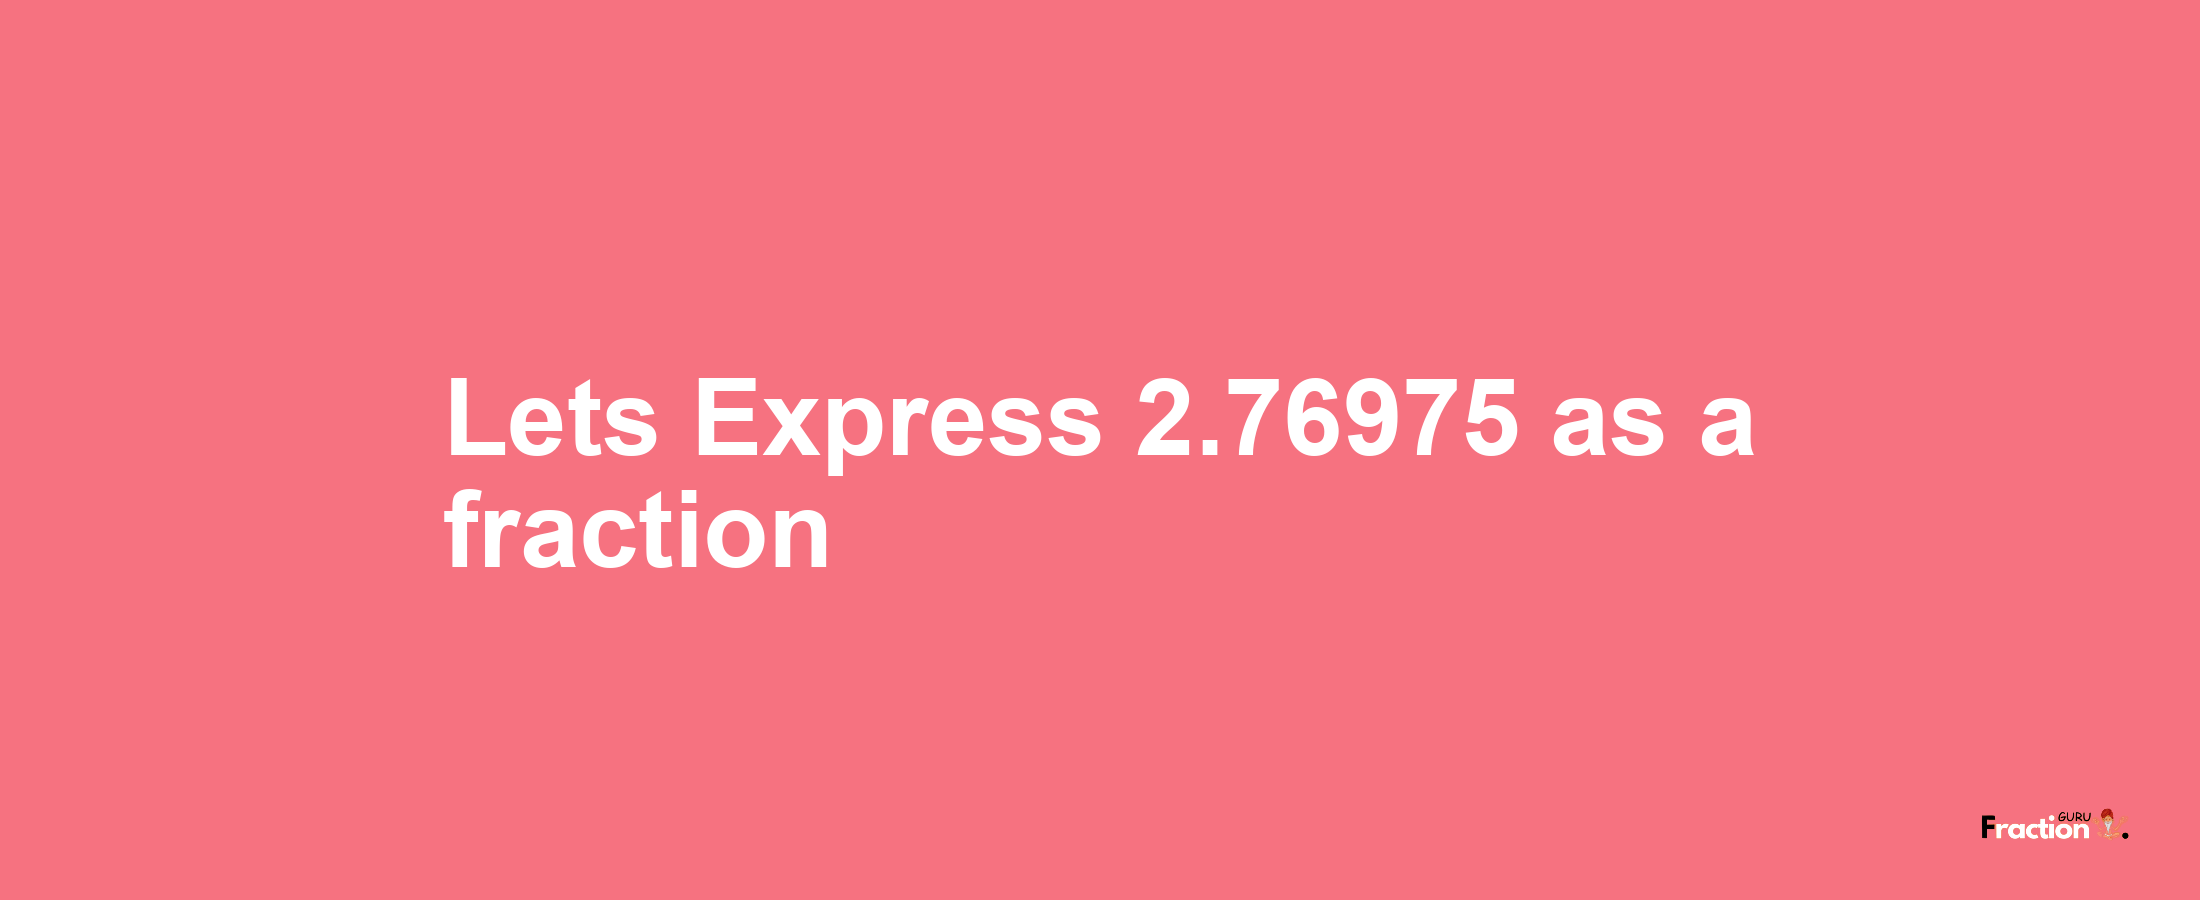 Lets Express 2.76975 as afraction